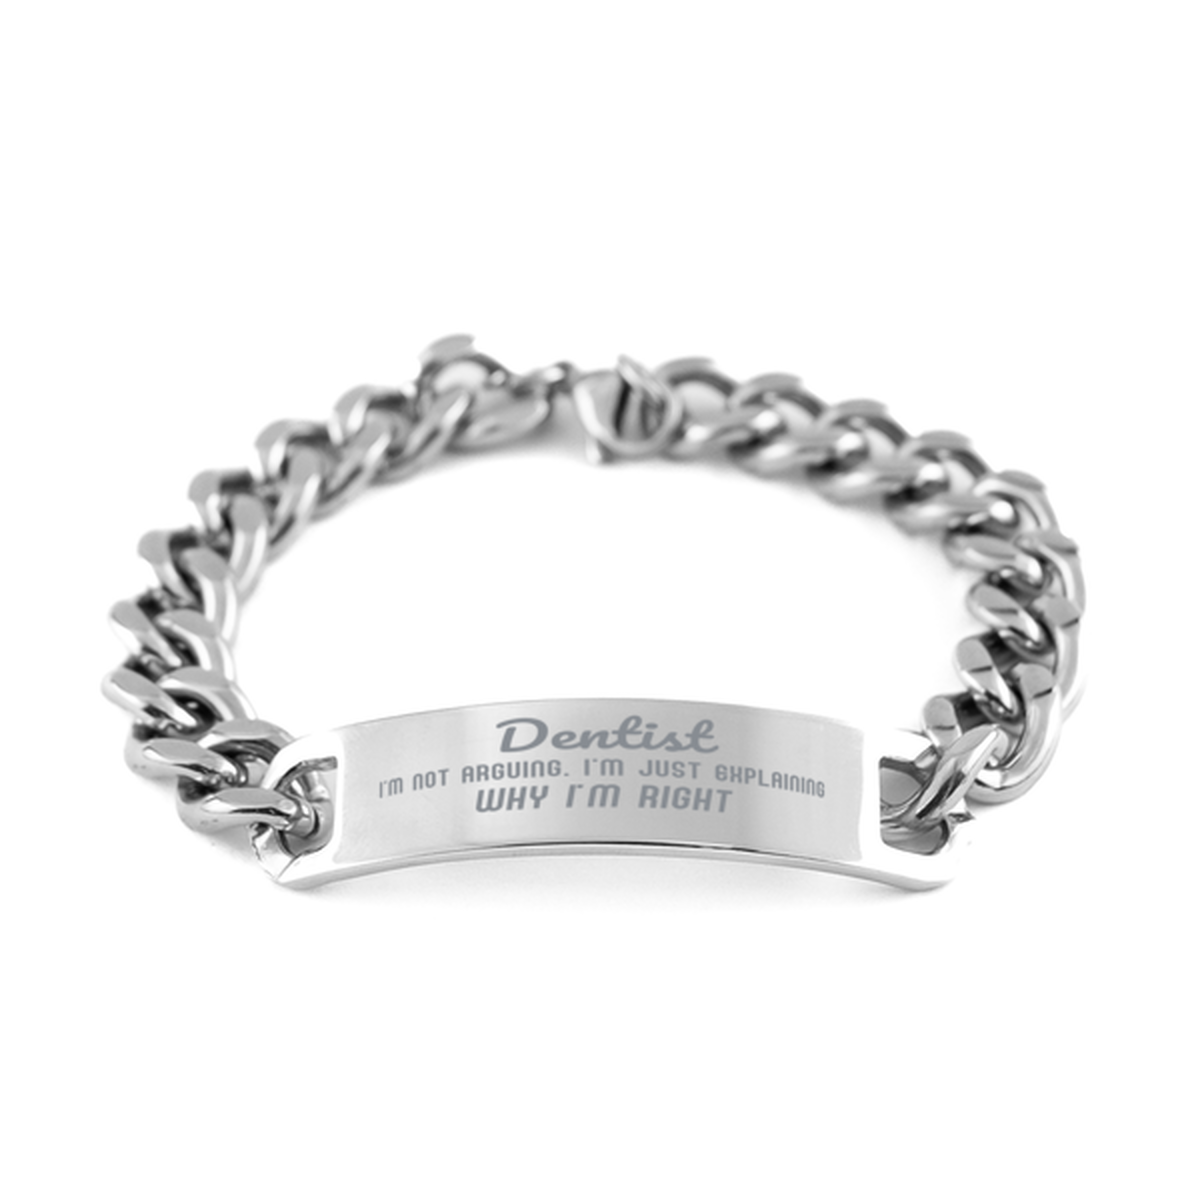 Dentist I'm not Arguing. I'm Just Explaining Why I'm RIGHT Cuban Chain Stainless Steel Bracelet, Graduation Birthday Christmas Dentist Gifts For Dentist Funny Saying Quote Present for Men Women Coworker